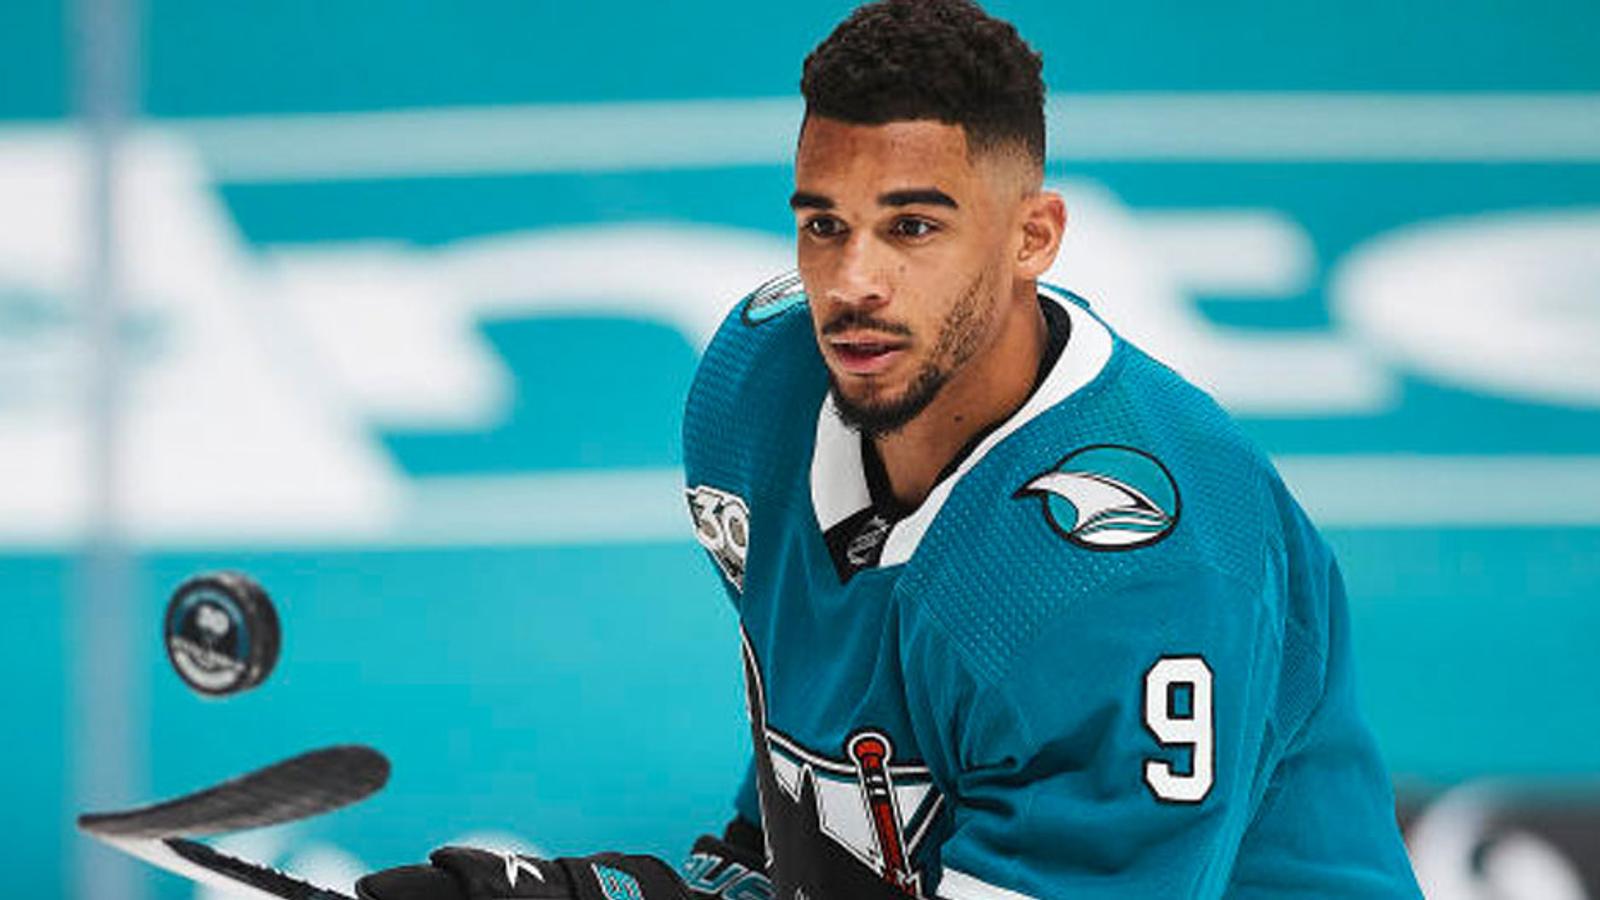 NHL's investigation into Evander Kane has reportedly “stalled out”